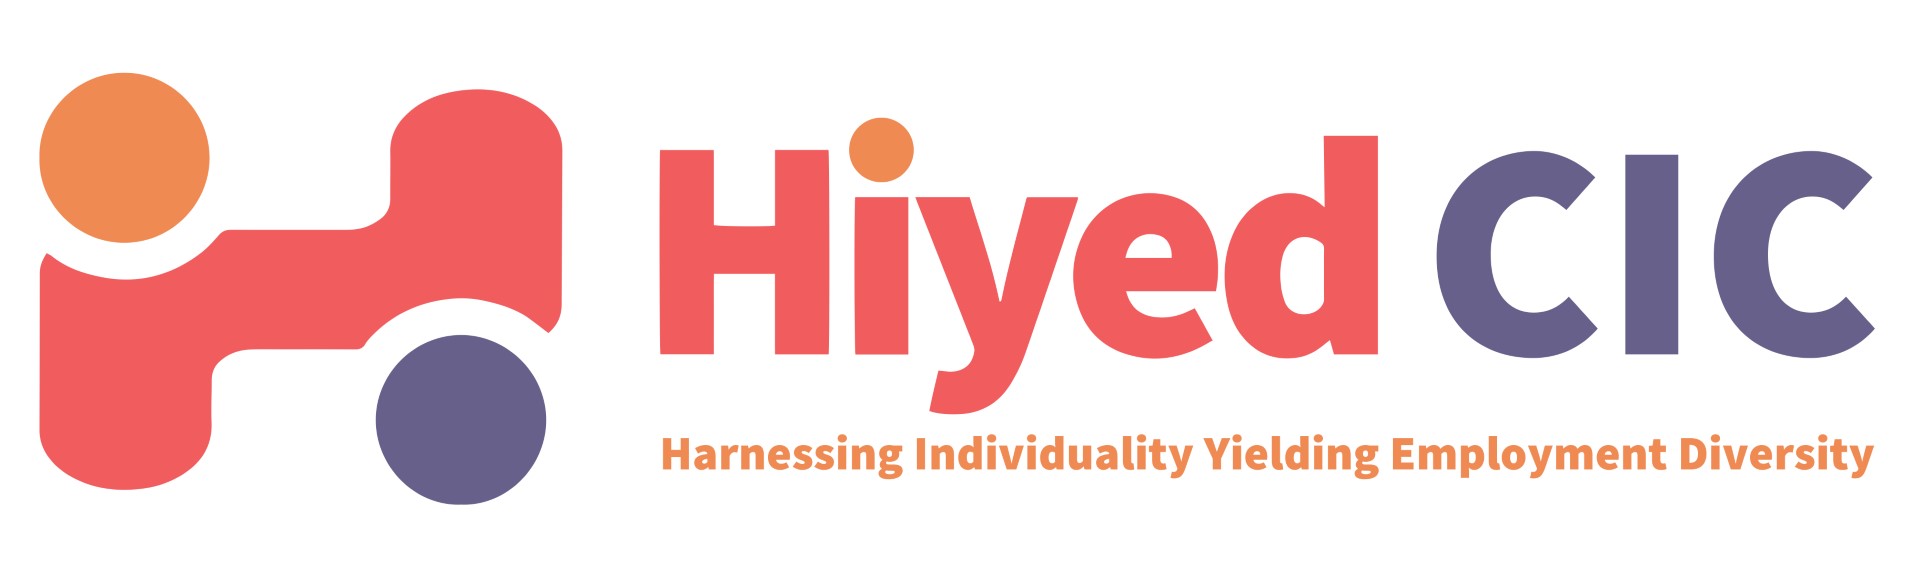 logo for HIYED CIC